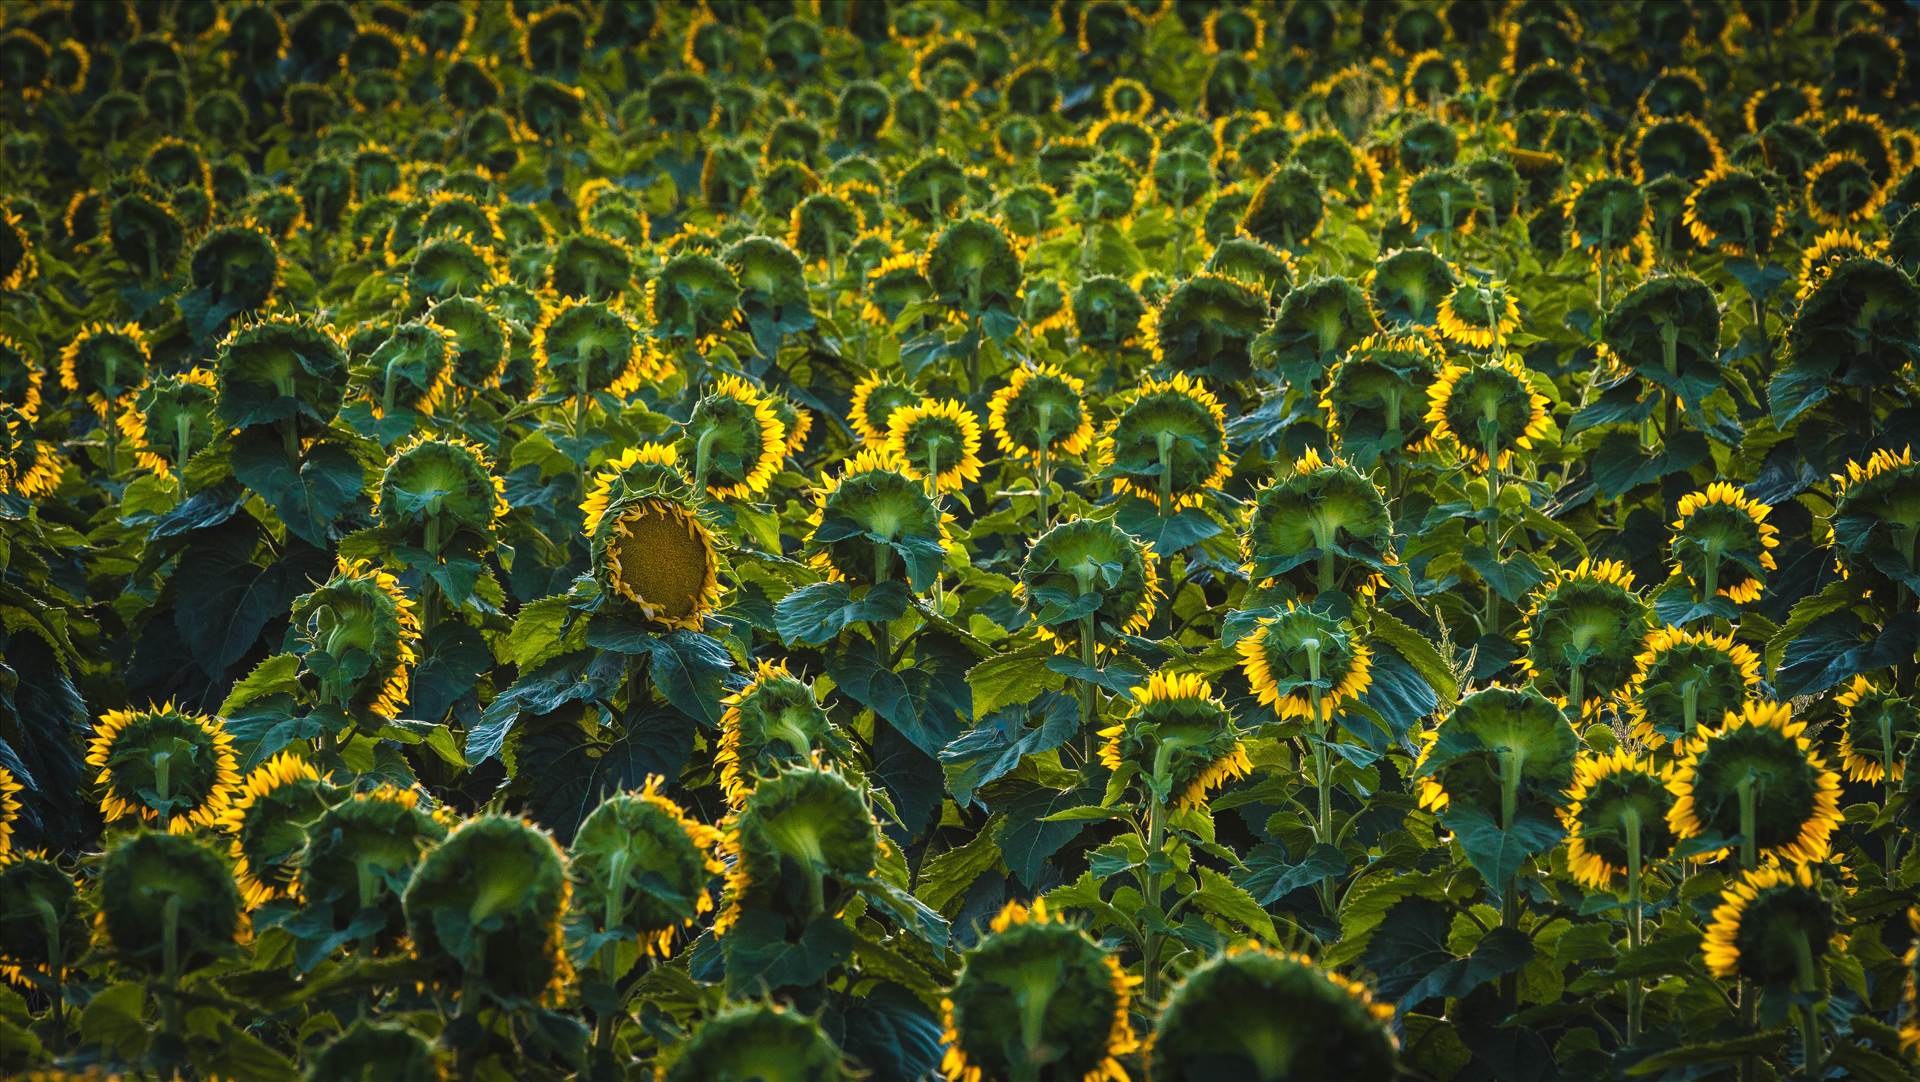 Sunflower Sunrise II - Sunflowers watching the sun rise, near Denver International Airport. One of them seems to be looking back... by Scott Smith Photos